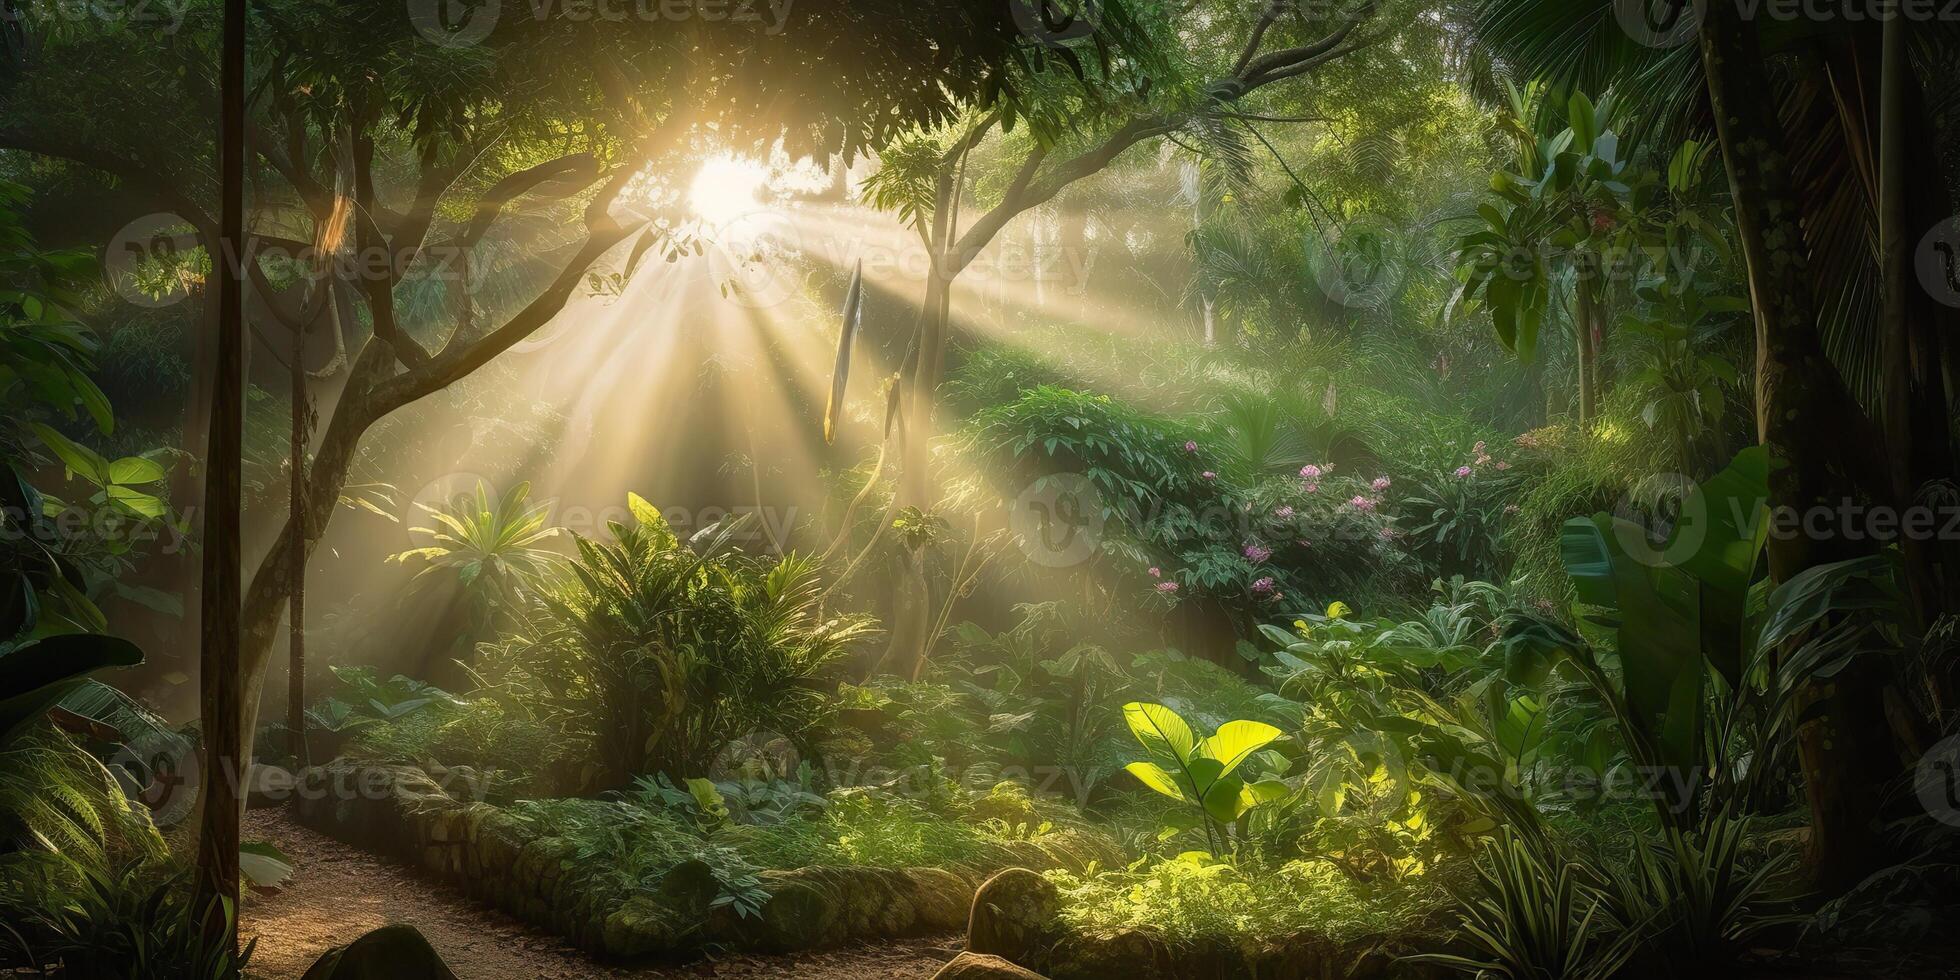 Tropical rain jungle deep forest with beab ray light shining. Nature outdoor adventure vibe scene background view photo